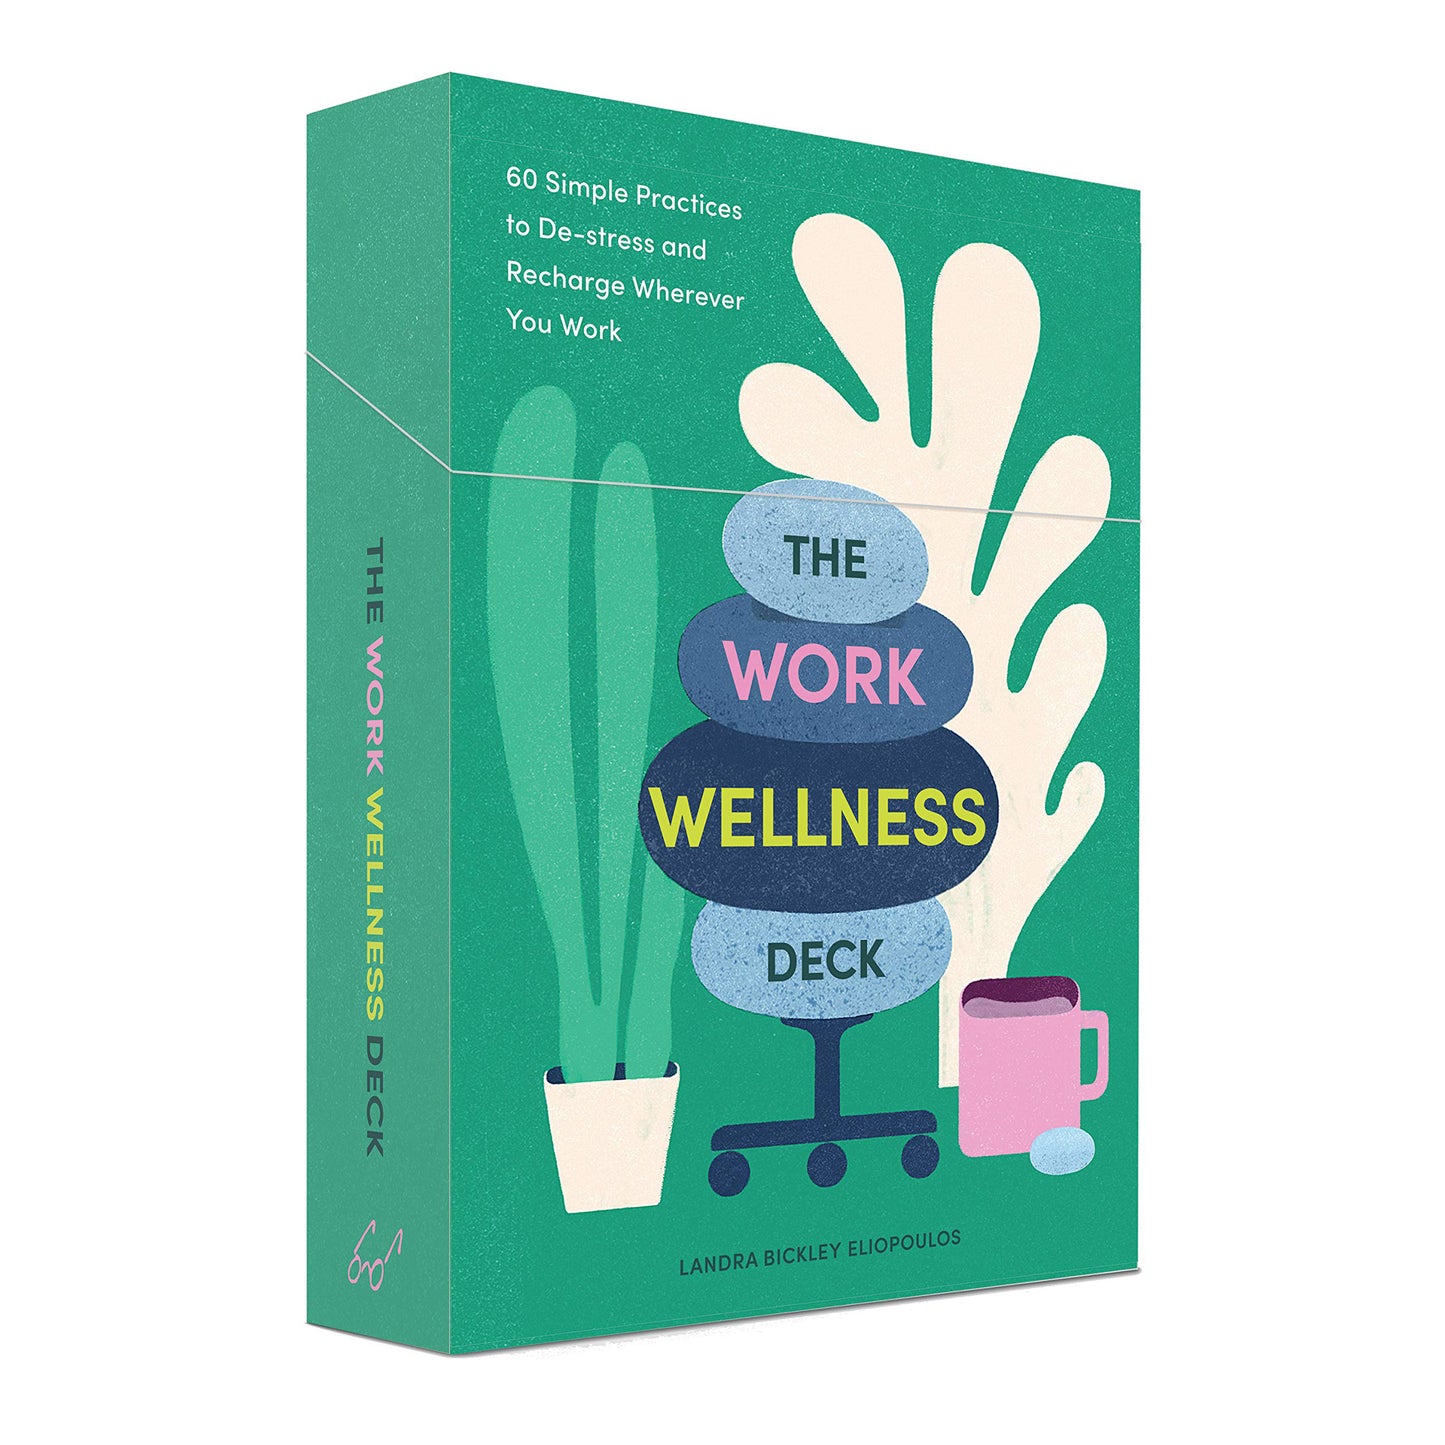 Work Wellness Deck: 60 Simple Practices to De-stress and Recharge Wherever You Work